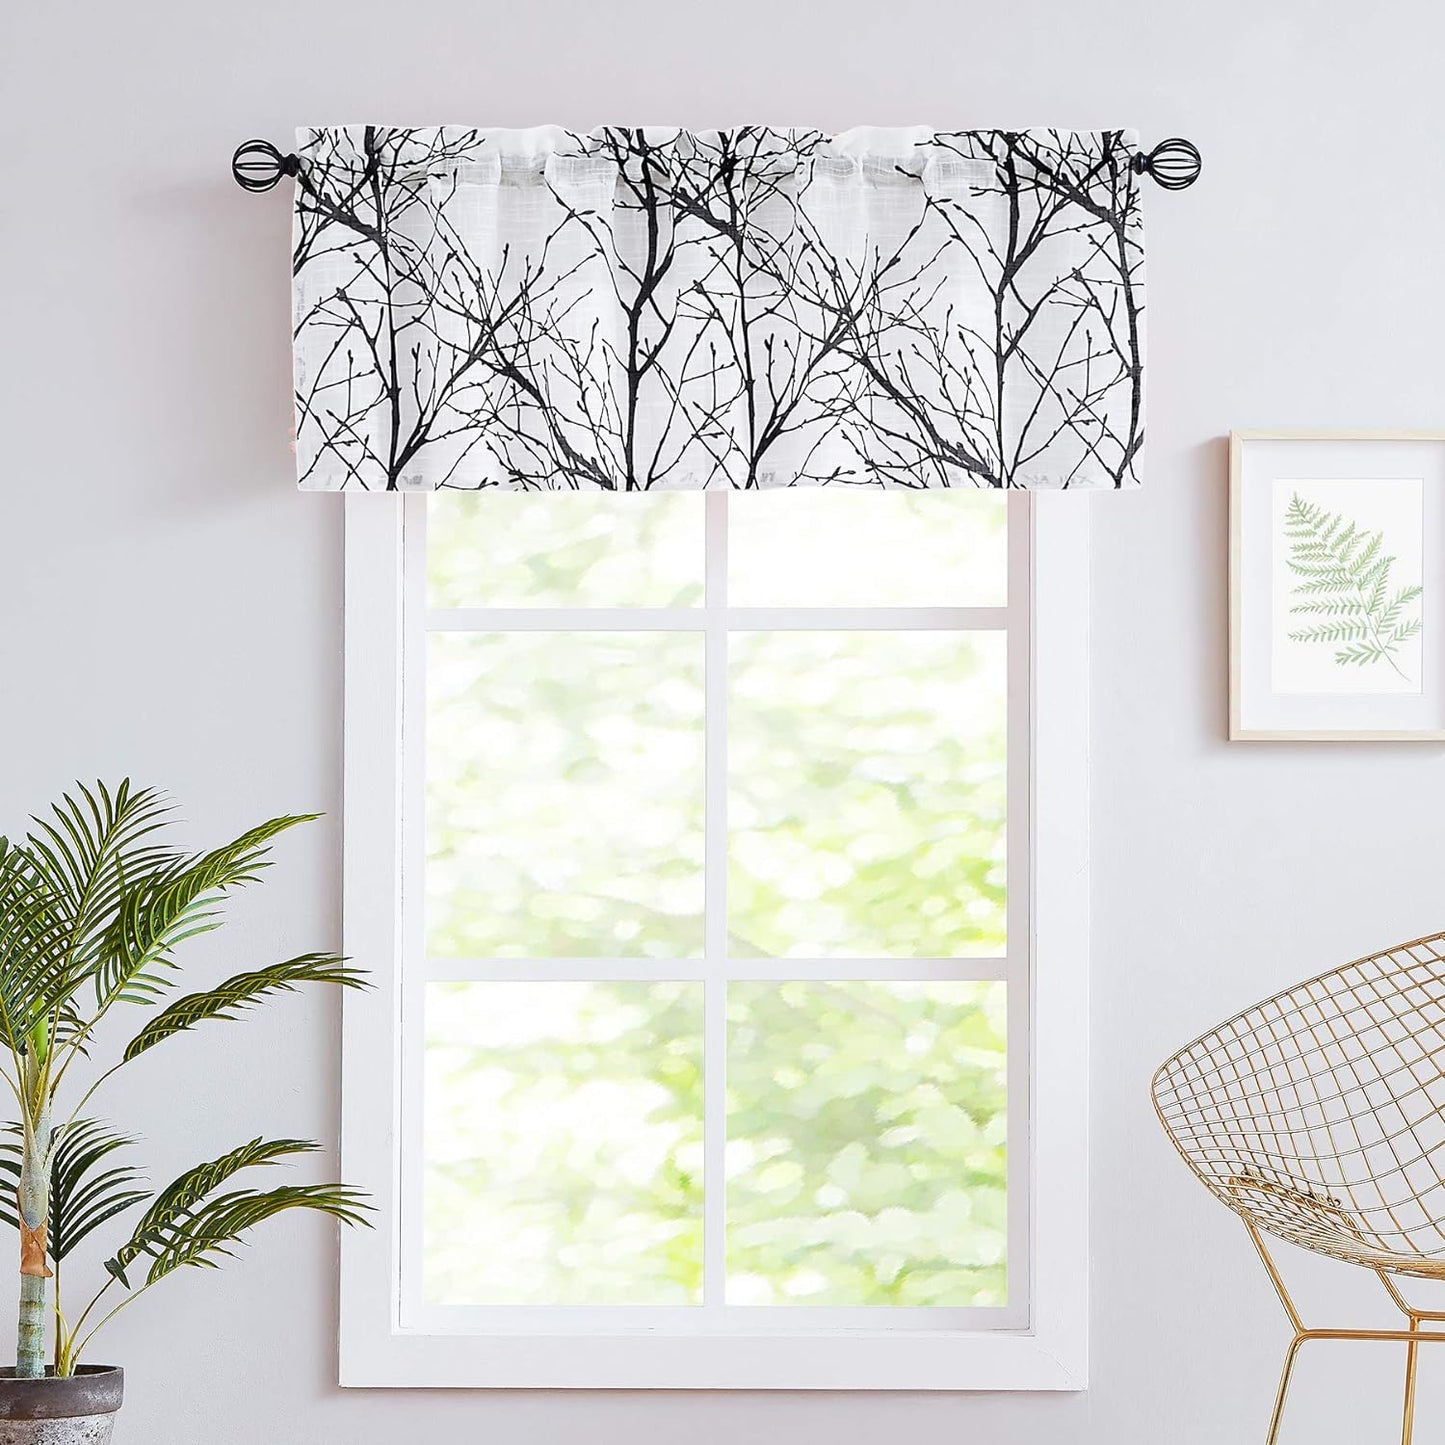 FMFUNCTEX Blue White Curtains for Kitchen Living Room 72“ Grey Tree Branches Print Curtain Set for Small Windows Linen Textured Semi-Sheer Drapes for Bedroom Grommet Top, 2 Panels  Fmfunctex Black 50" X 18" 1Pc 